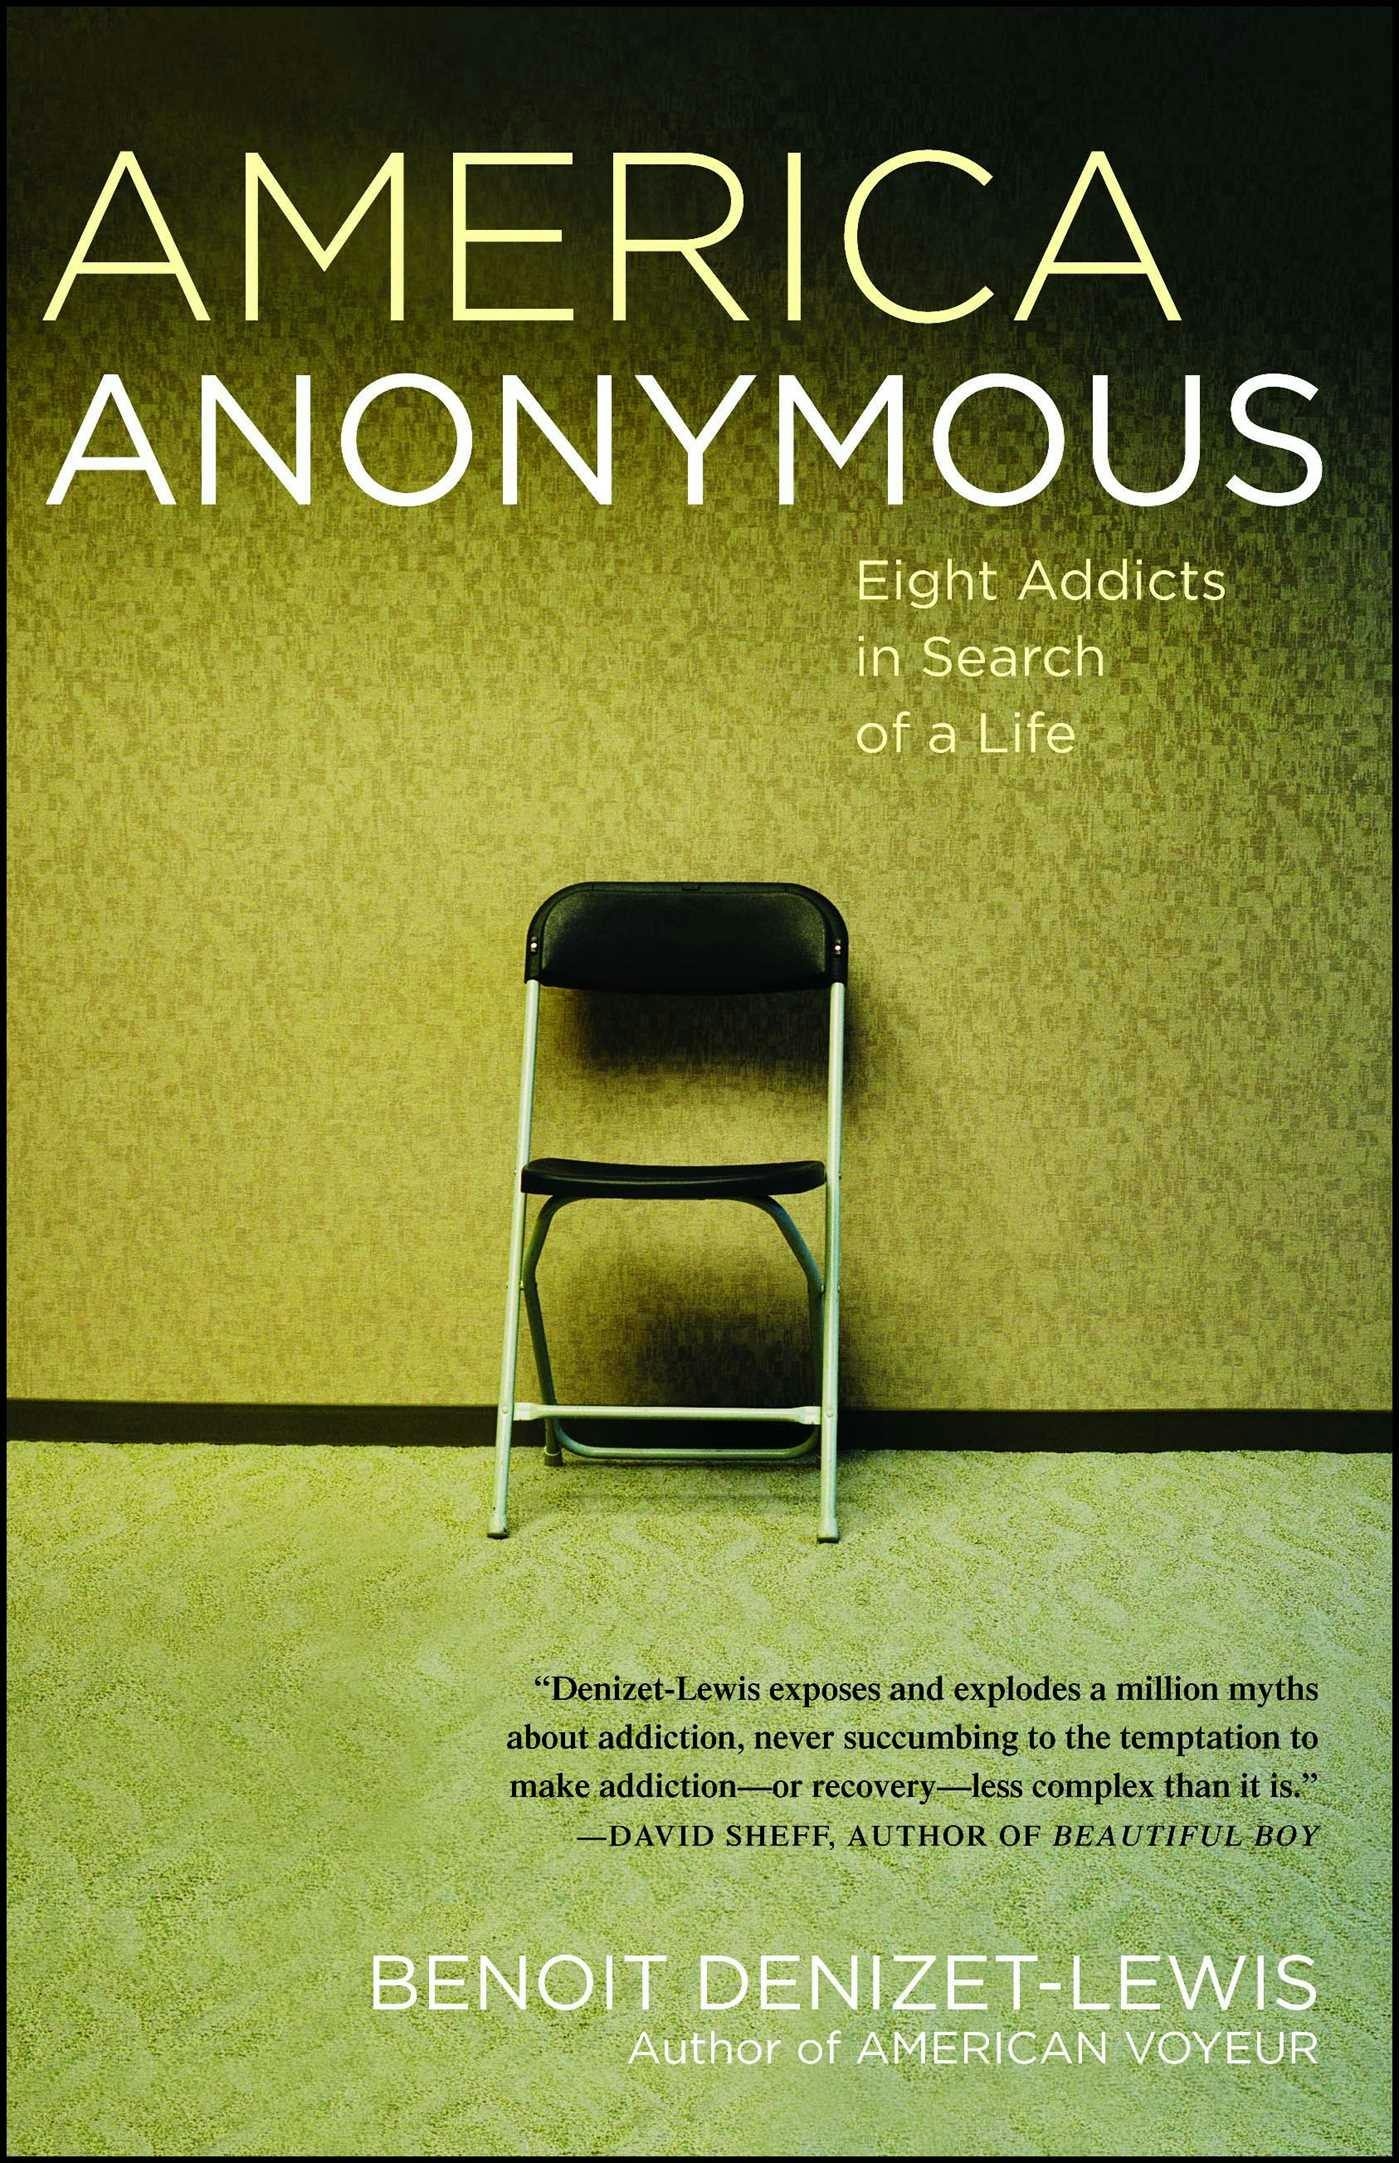 America Anonymous: Eight Addicts in Search of a Life - Benoit Denizet-Lewis